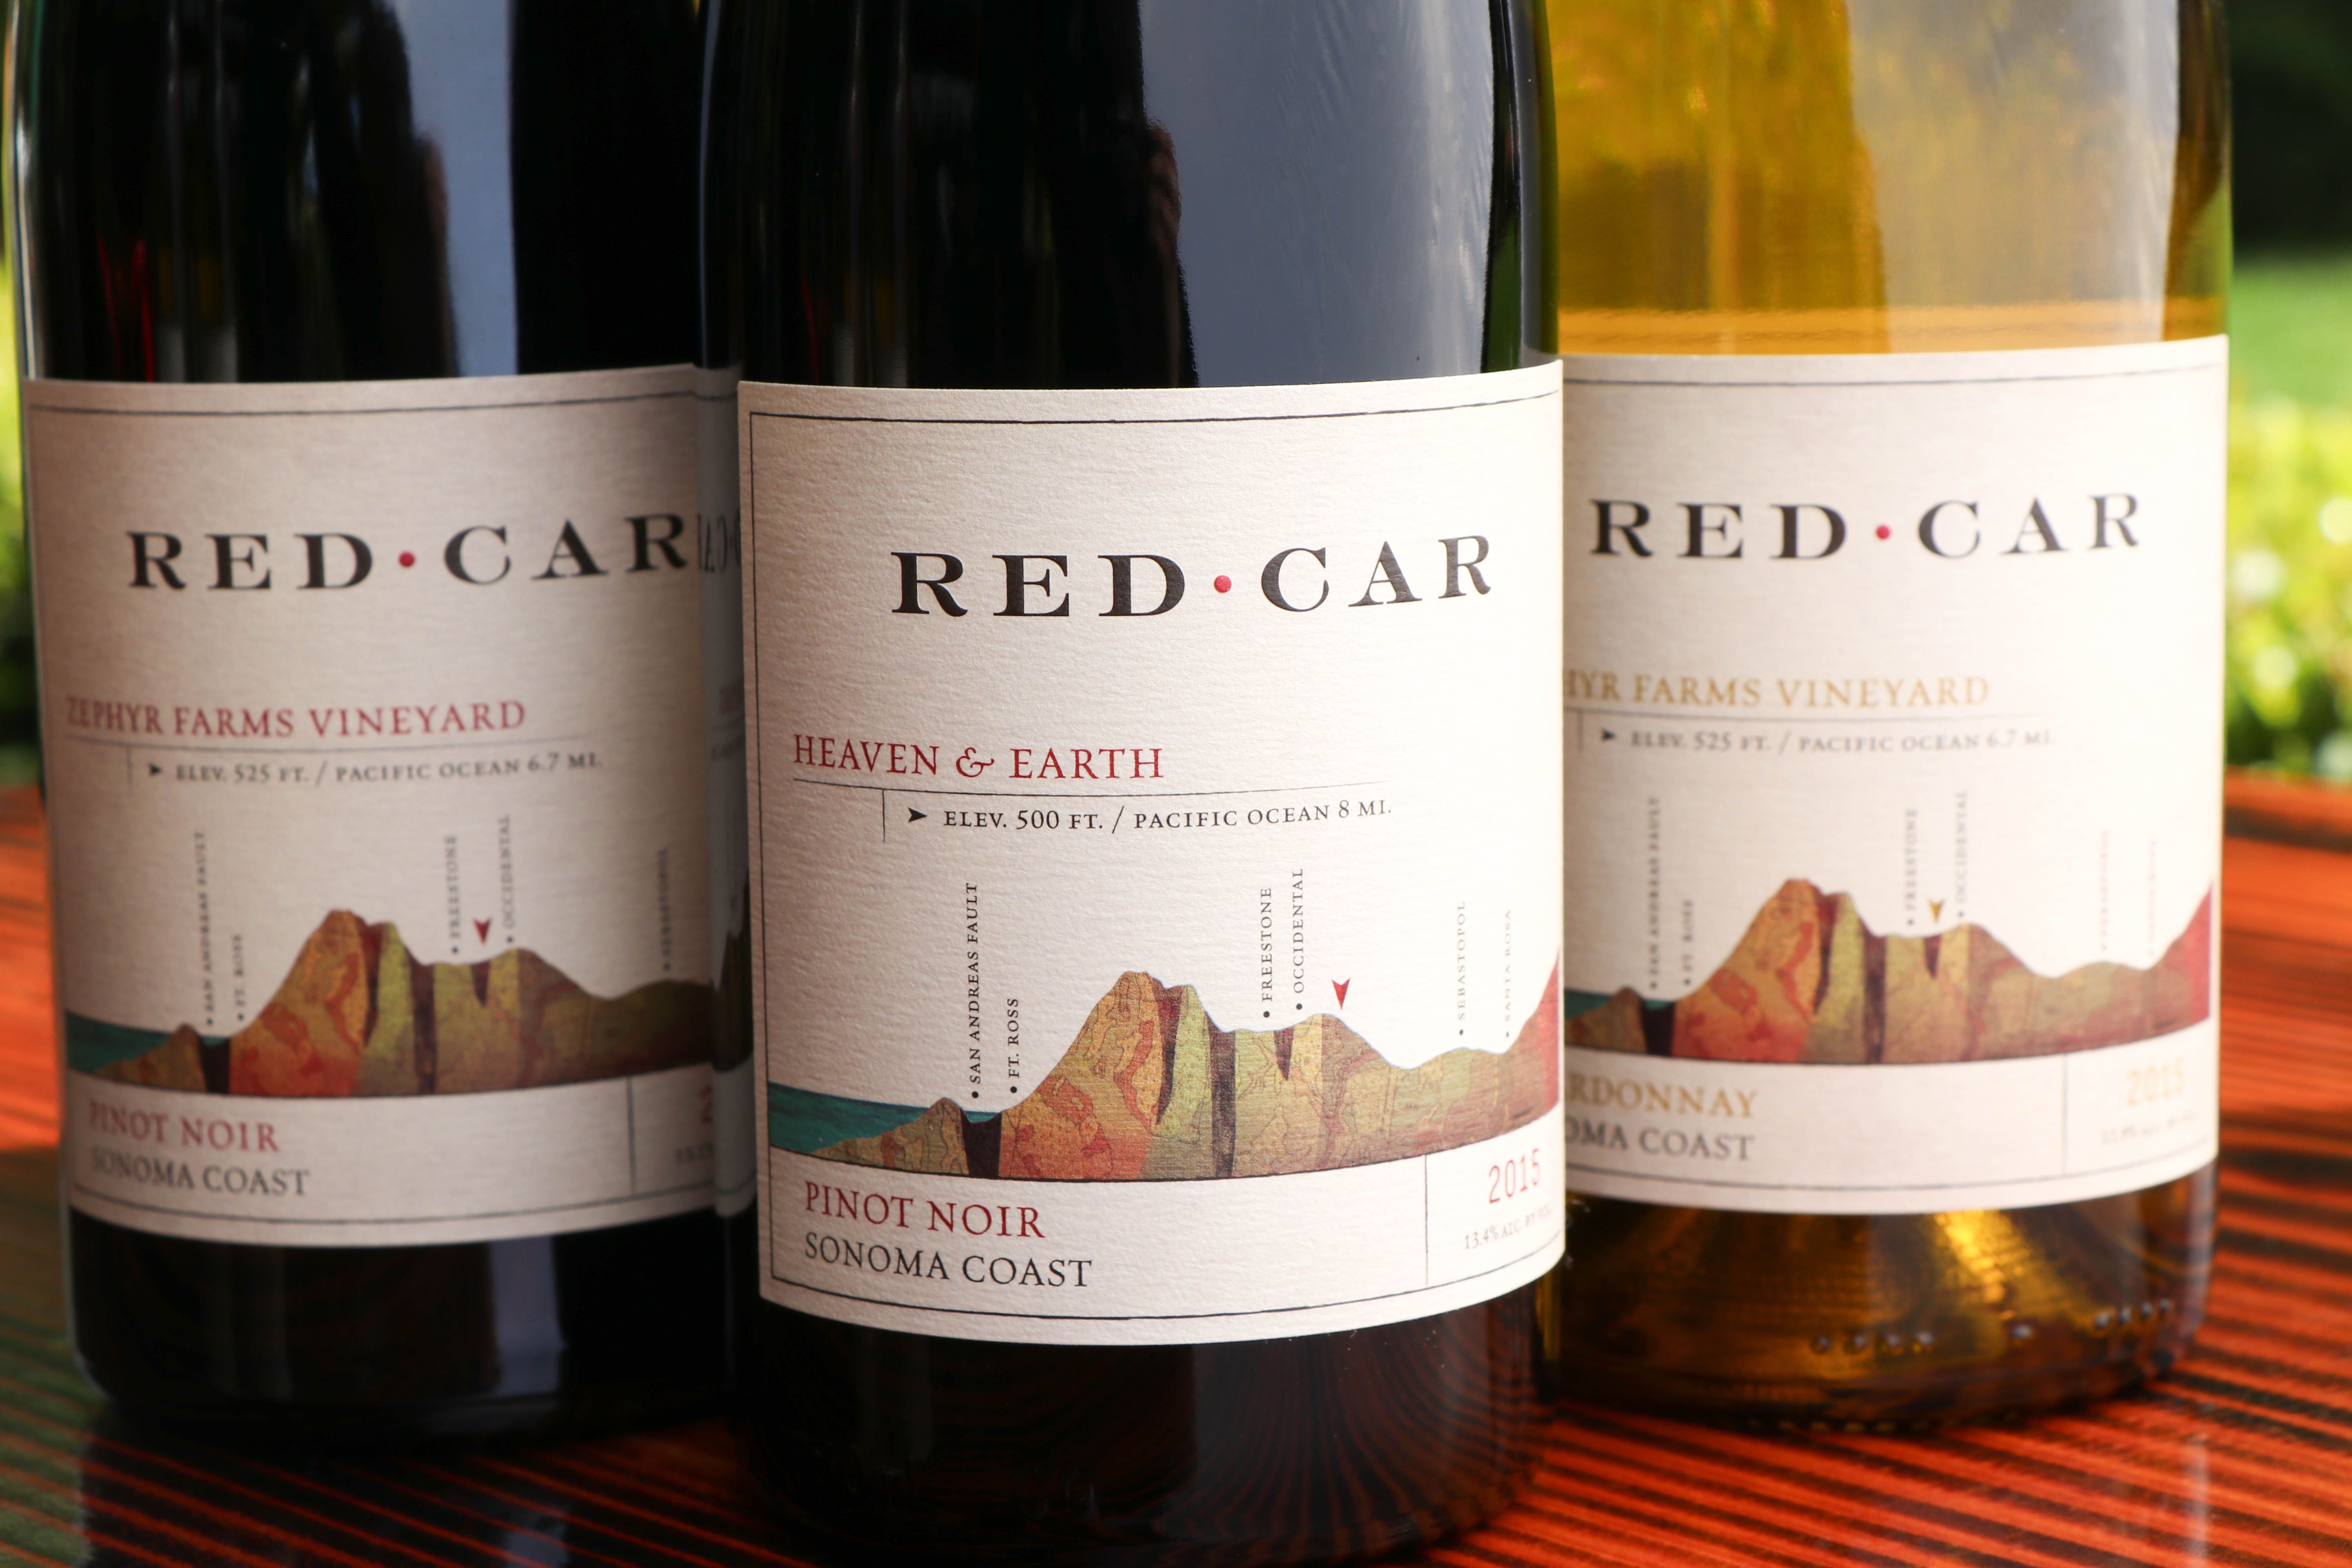 3 bottles lined up of Red Car Wine Heaven & Earth 2015 Wine